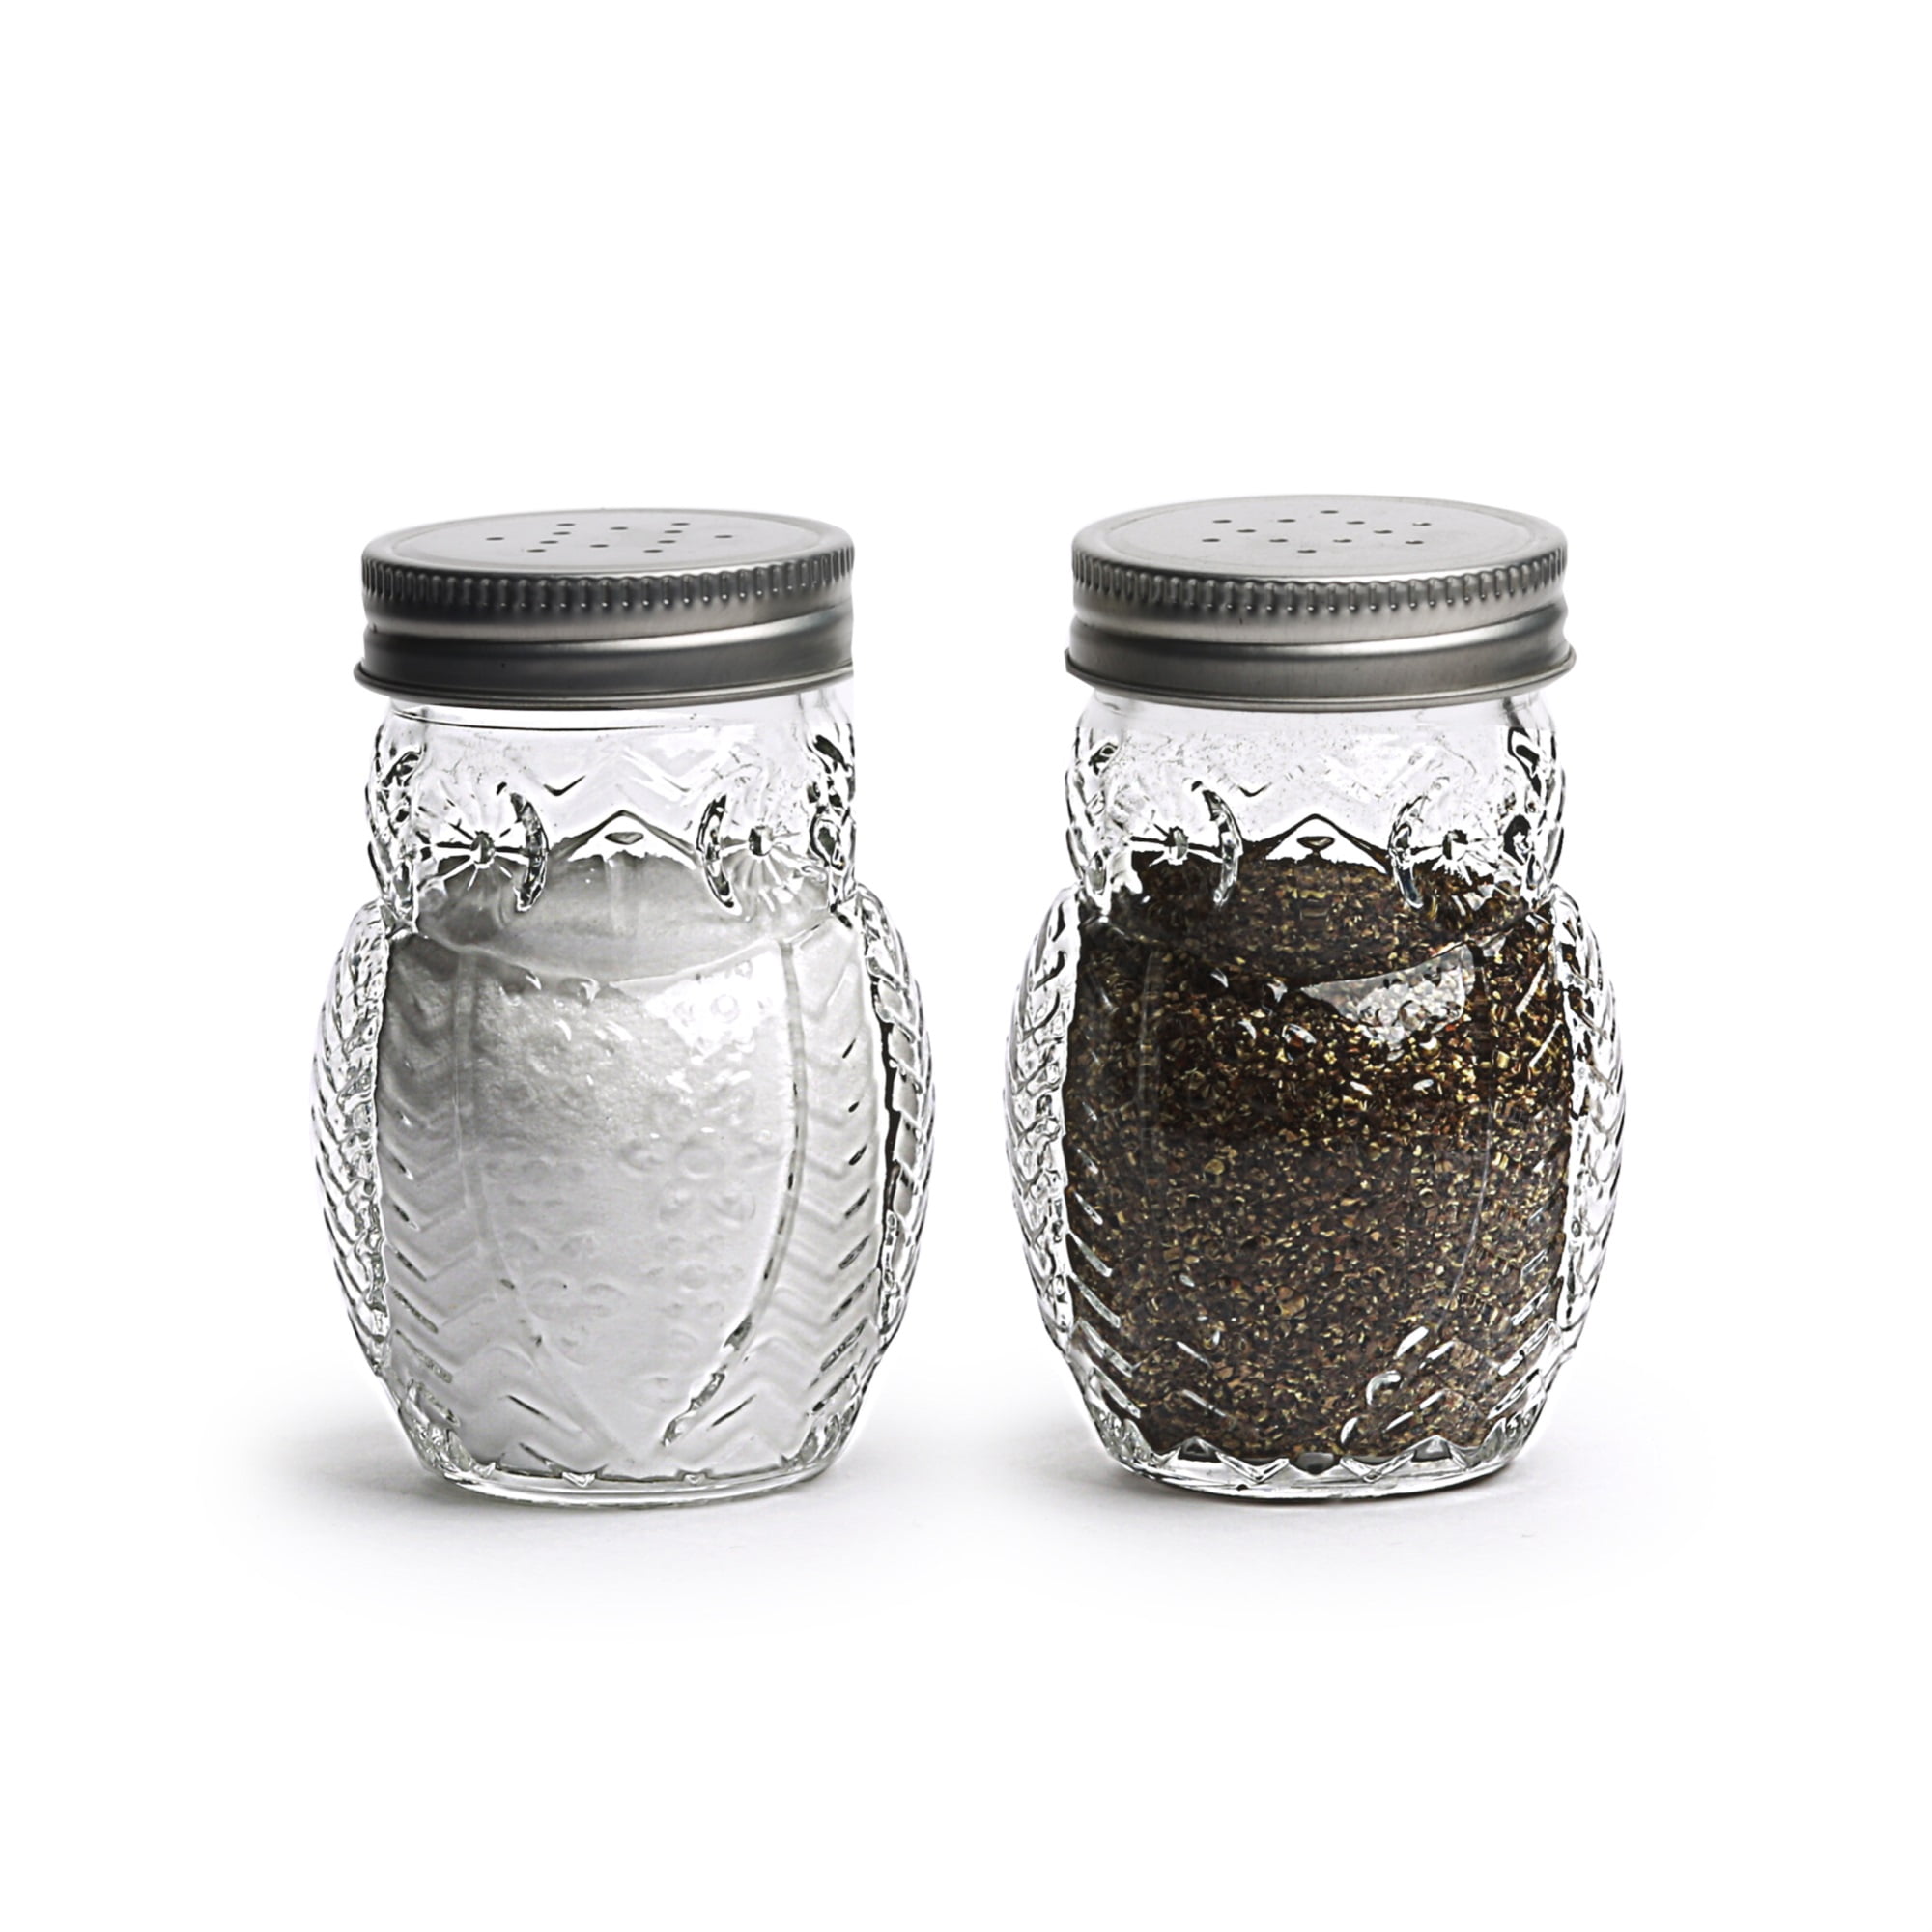 Home and Kitchen Uten Circleware Yorkshire Salt and Pepper Shakers 2-Piece Set 